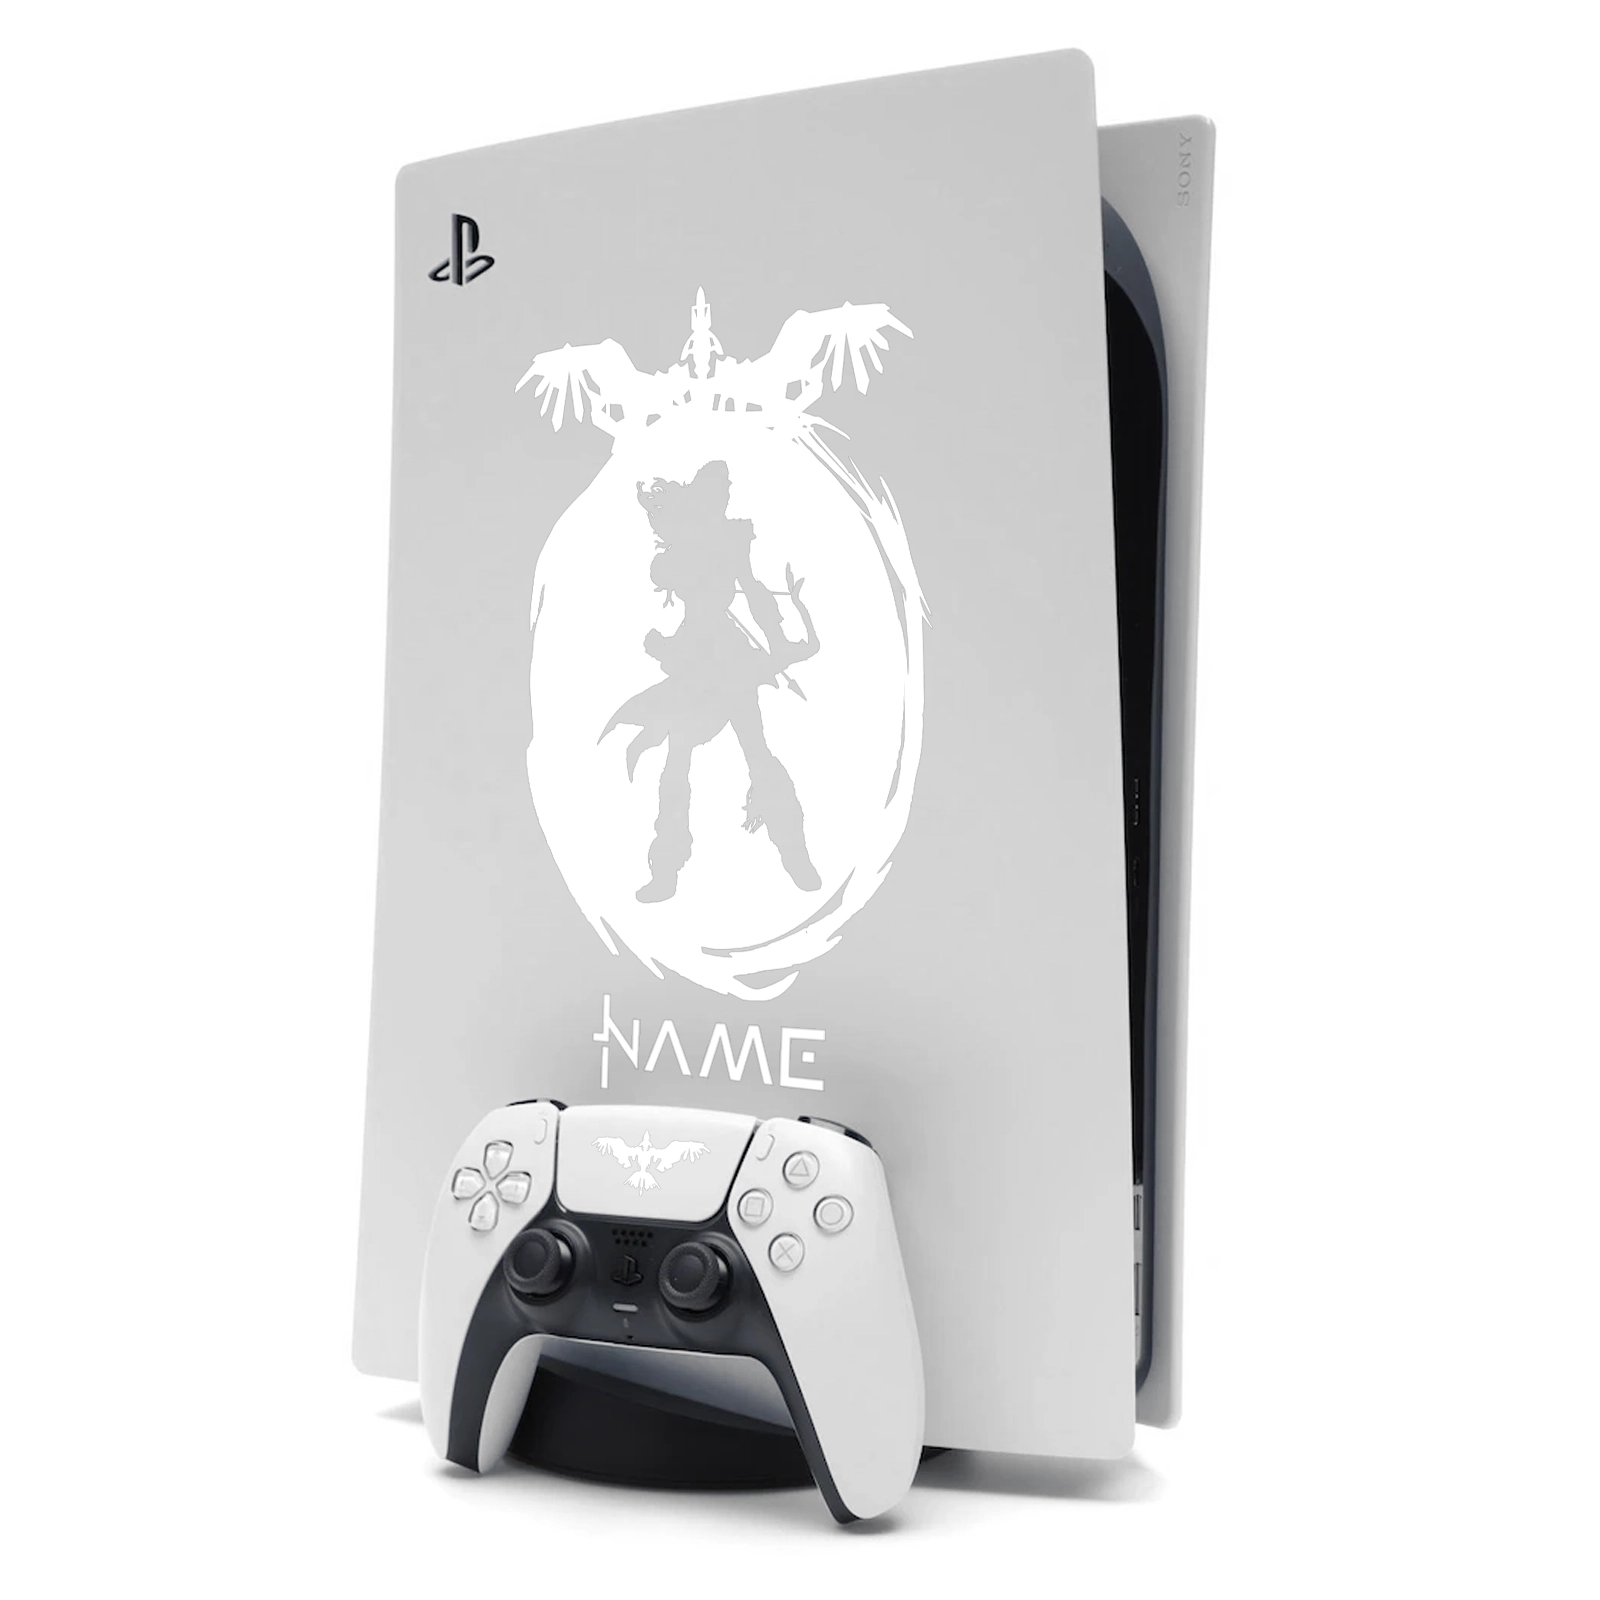 Horizon Aloy PS5 Sticker Skin for Playstation 5 in White